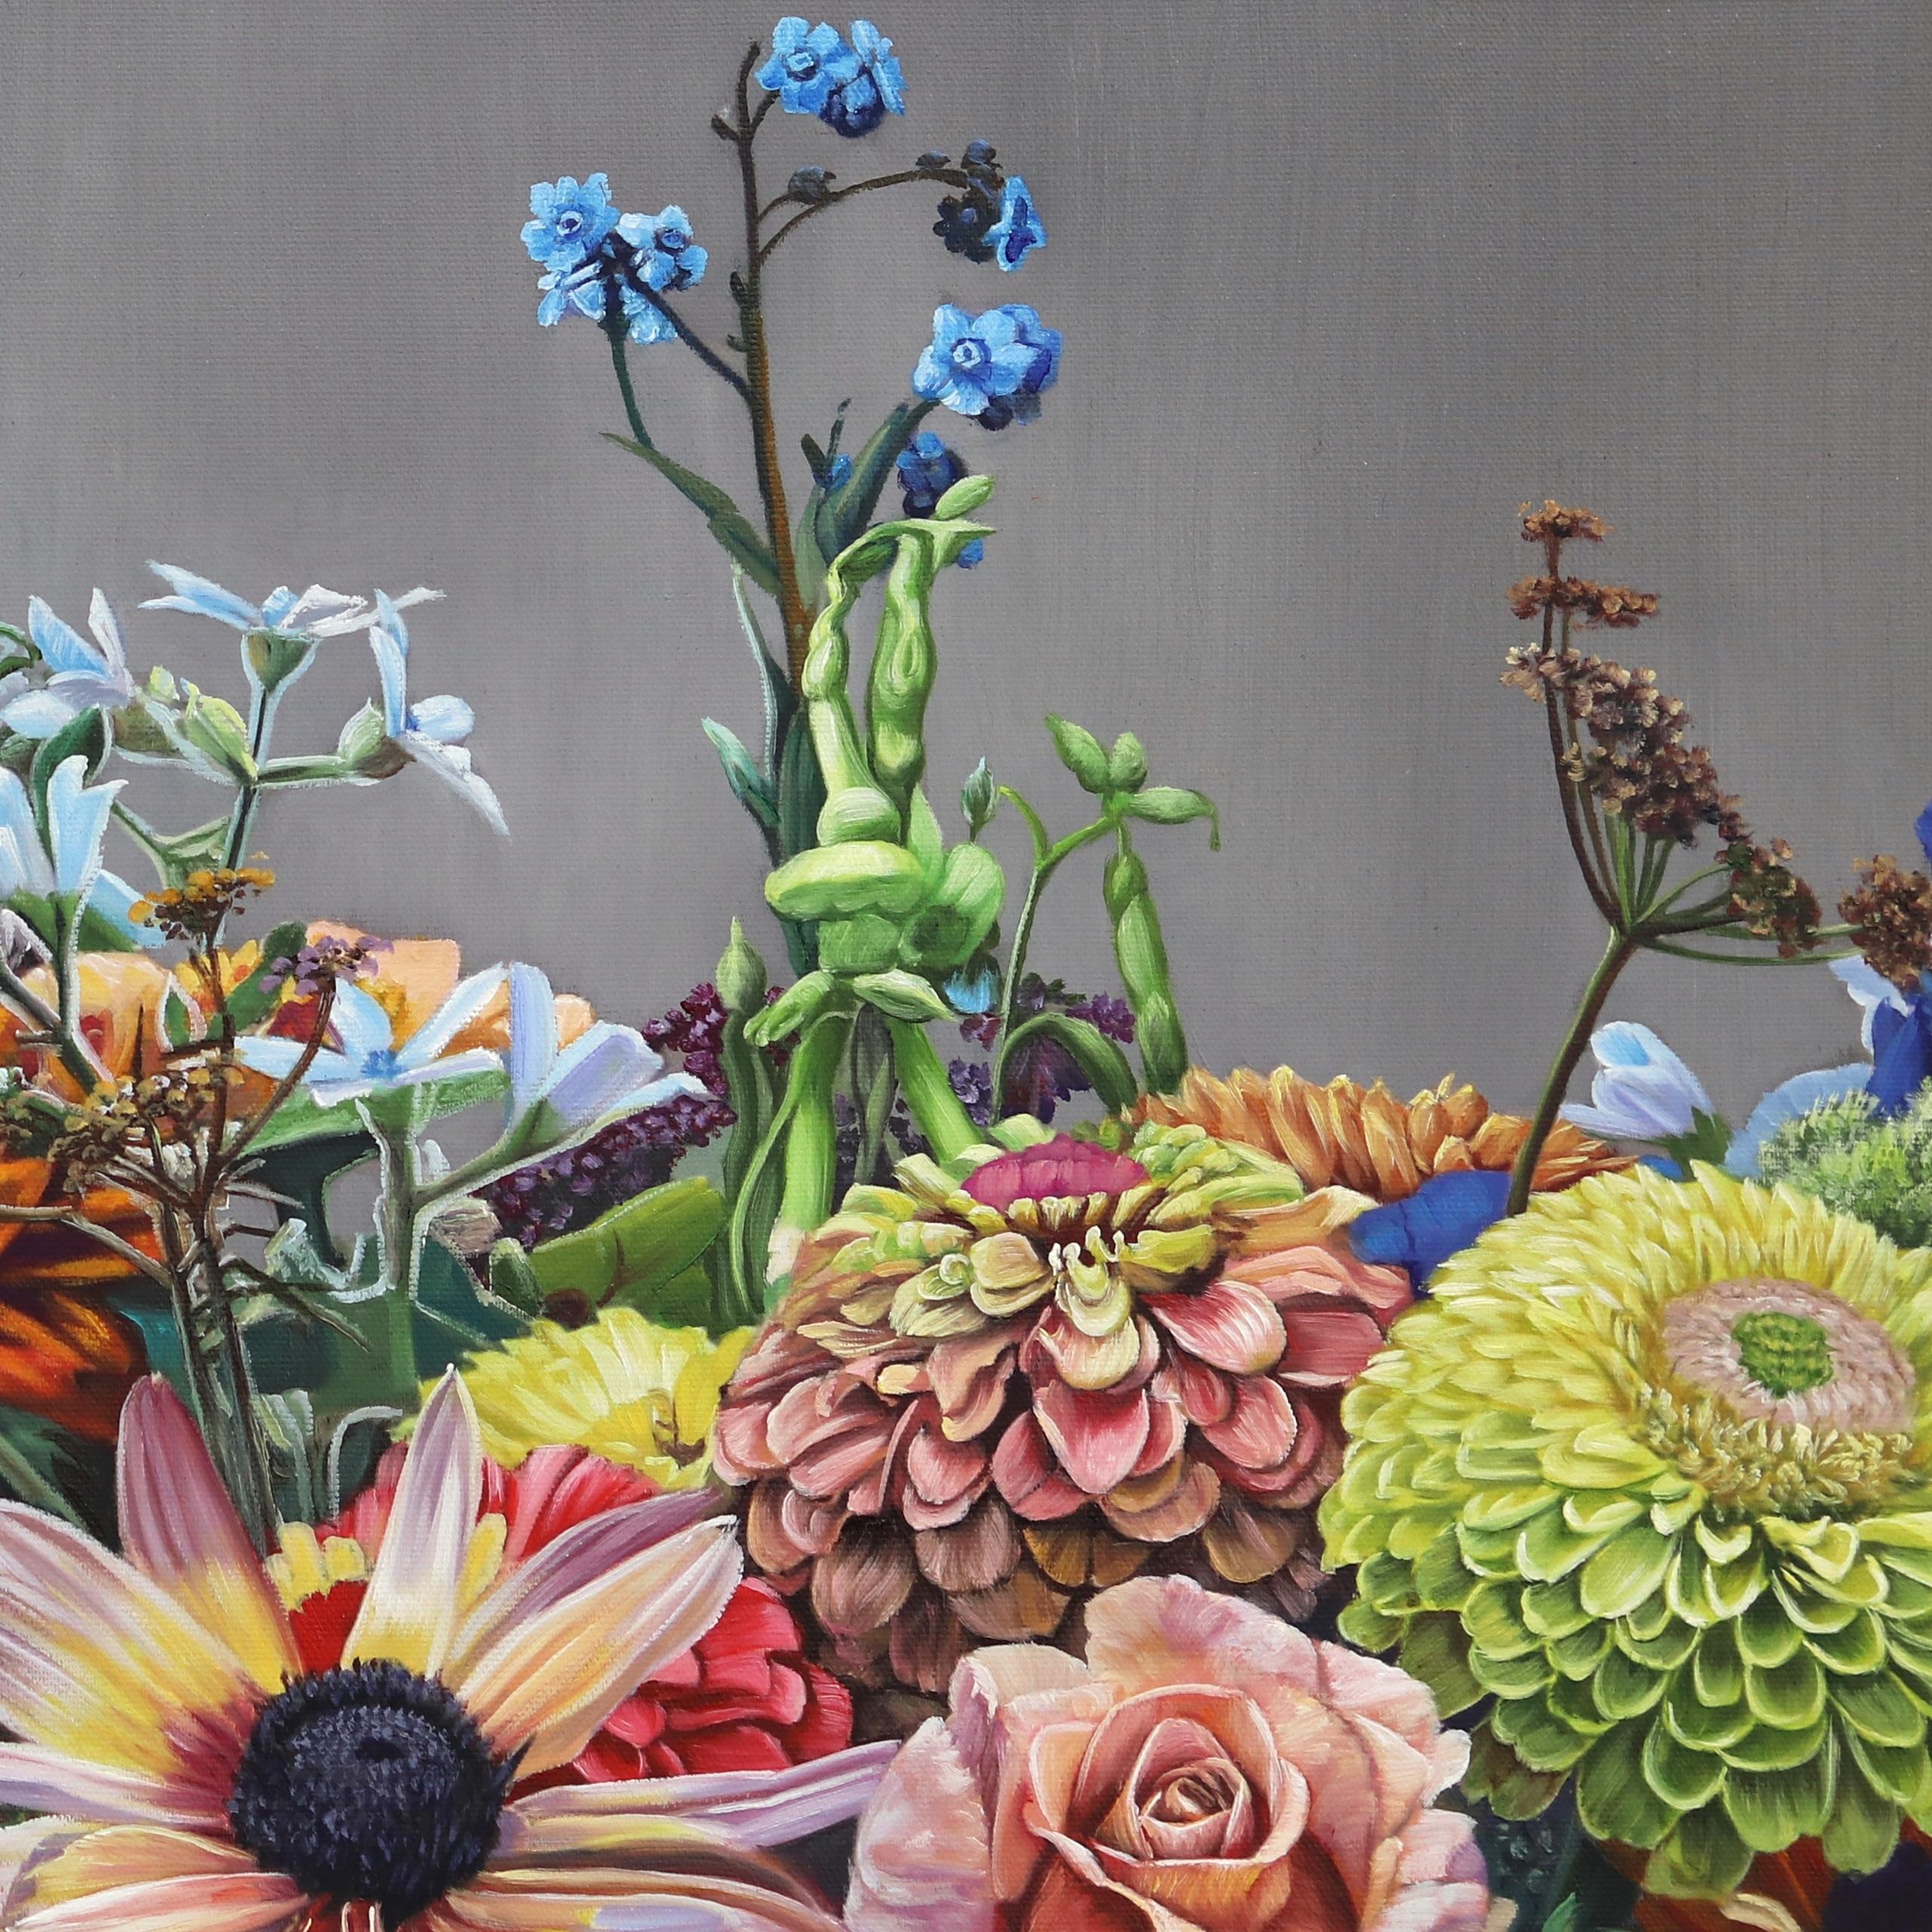 Touching Souls - Hyperrealist Floral Still Life Oil Painting 7